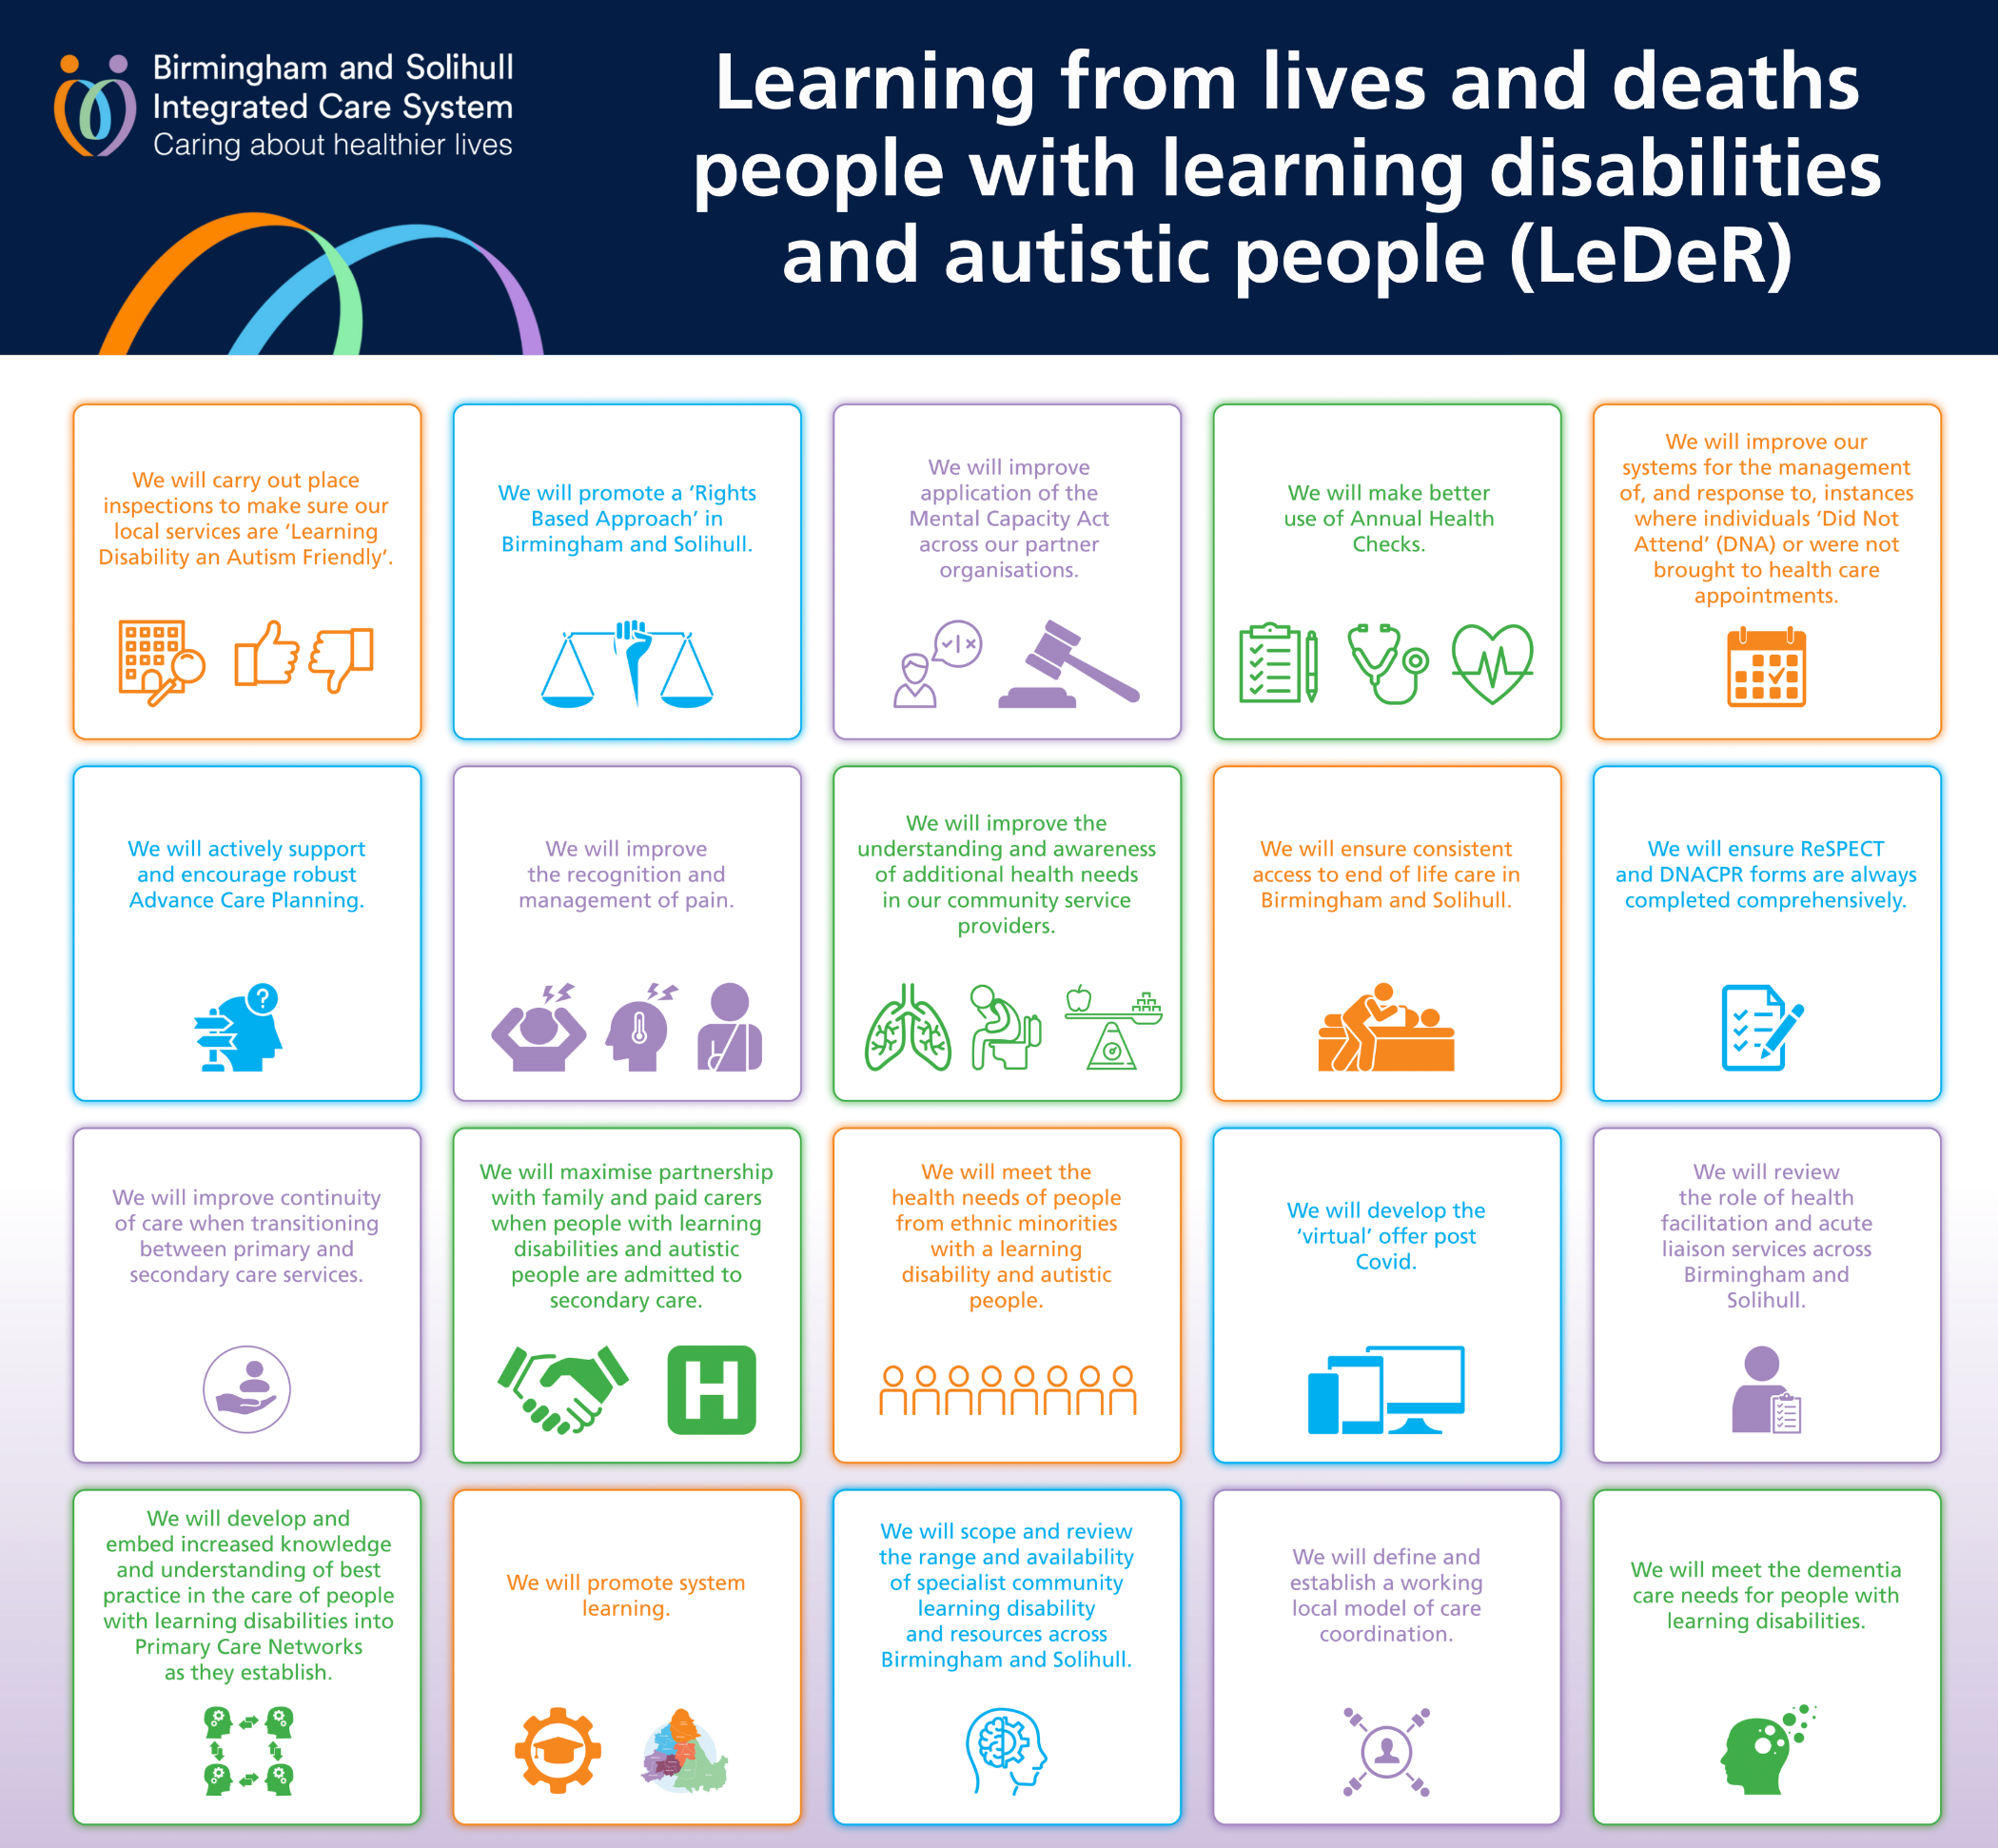 An infographic displaying the 20 priority areas identified for learning from the lives and deaths of people with learning disabilities and autism.